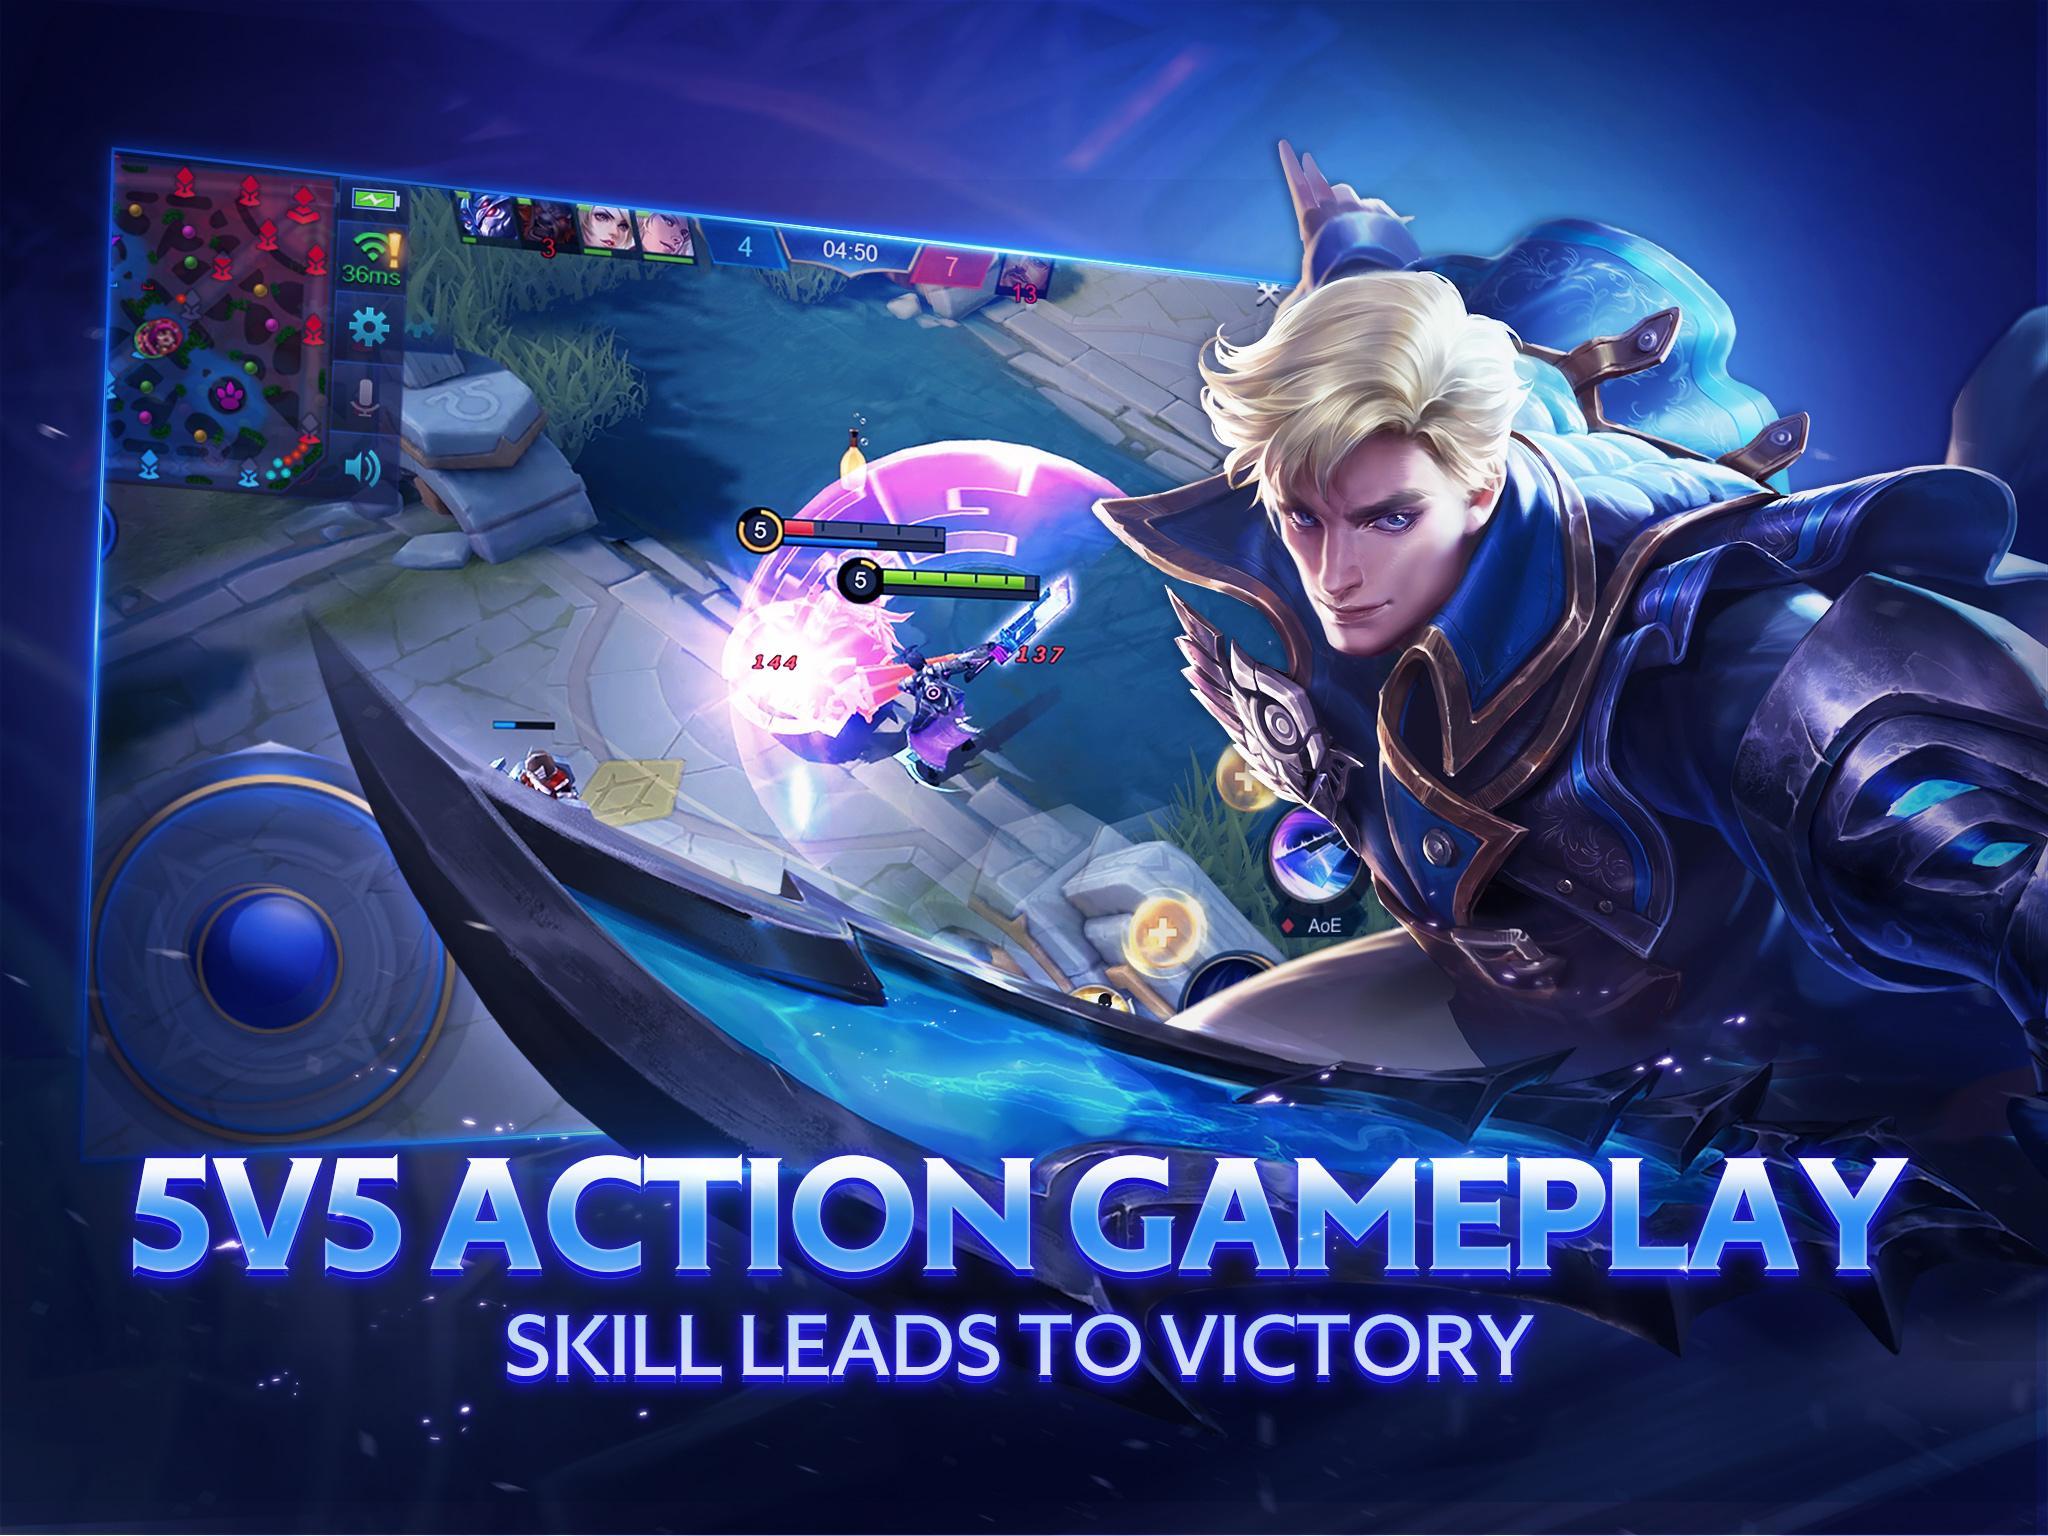 Mobile Legends Bang bang APK Download Free Action GAME for Android